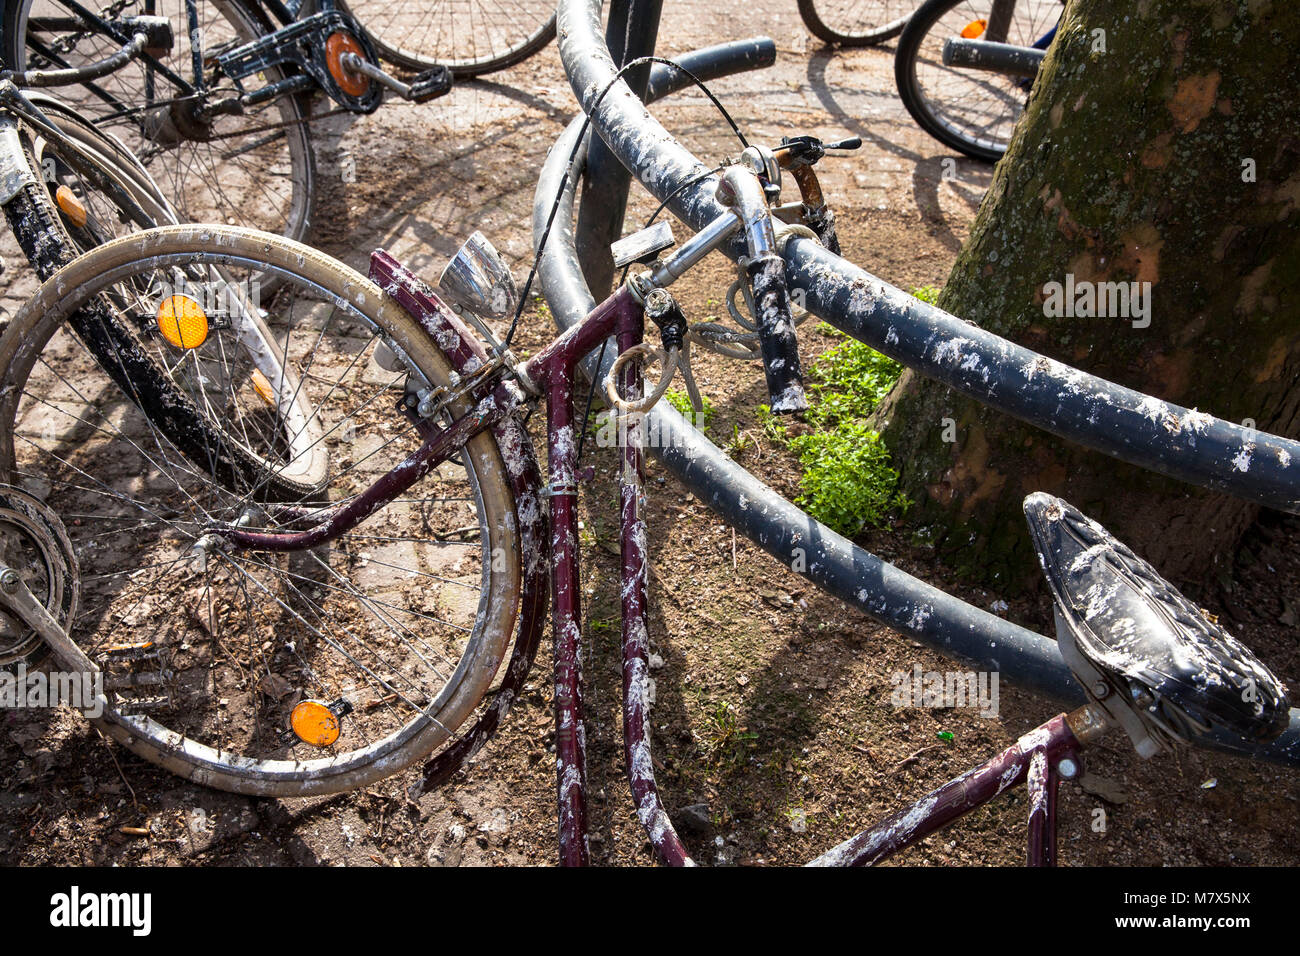 Germany, Cologne, with bird droppings covered bicycles in the city.  Deutschland, Koeln, mit Vogelkot verdreckte Fahrraeder in der Innenstadt. Stock Photo